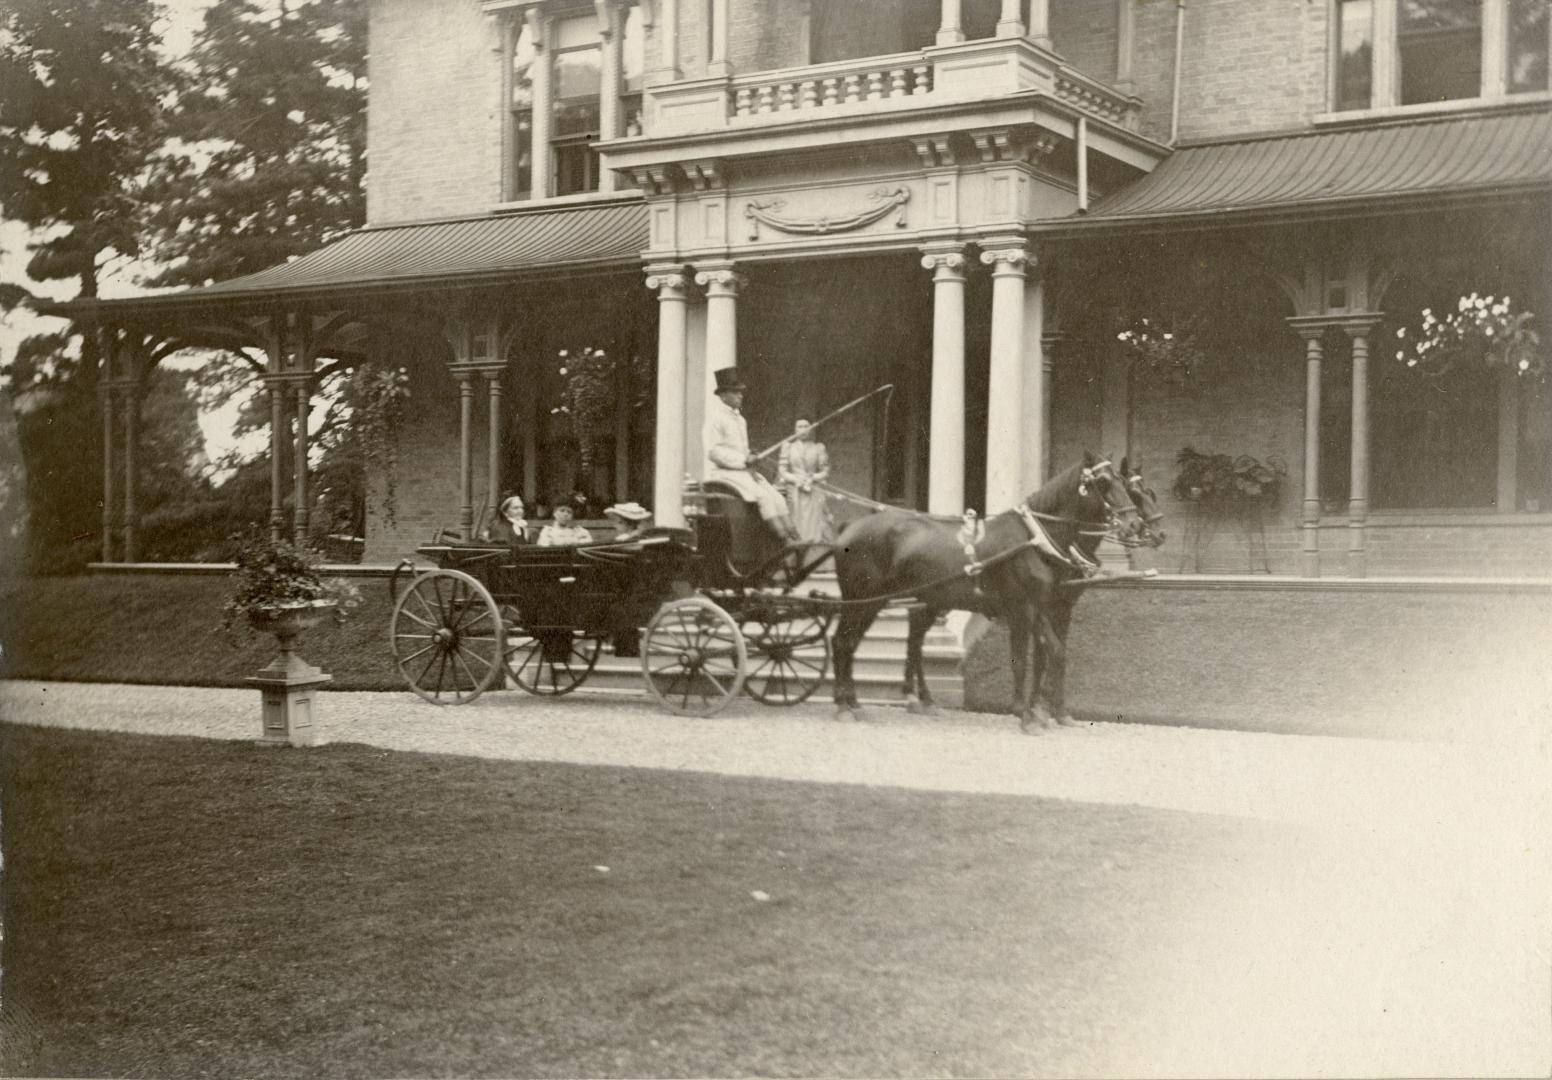 Image shows a horse carriage by the staircase of the building.